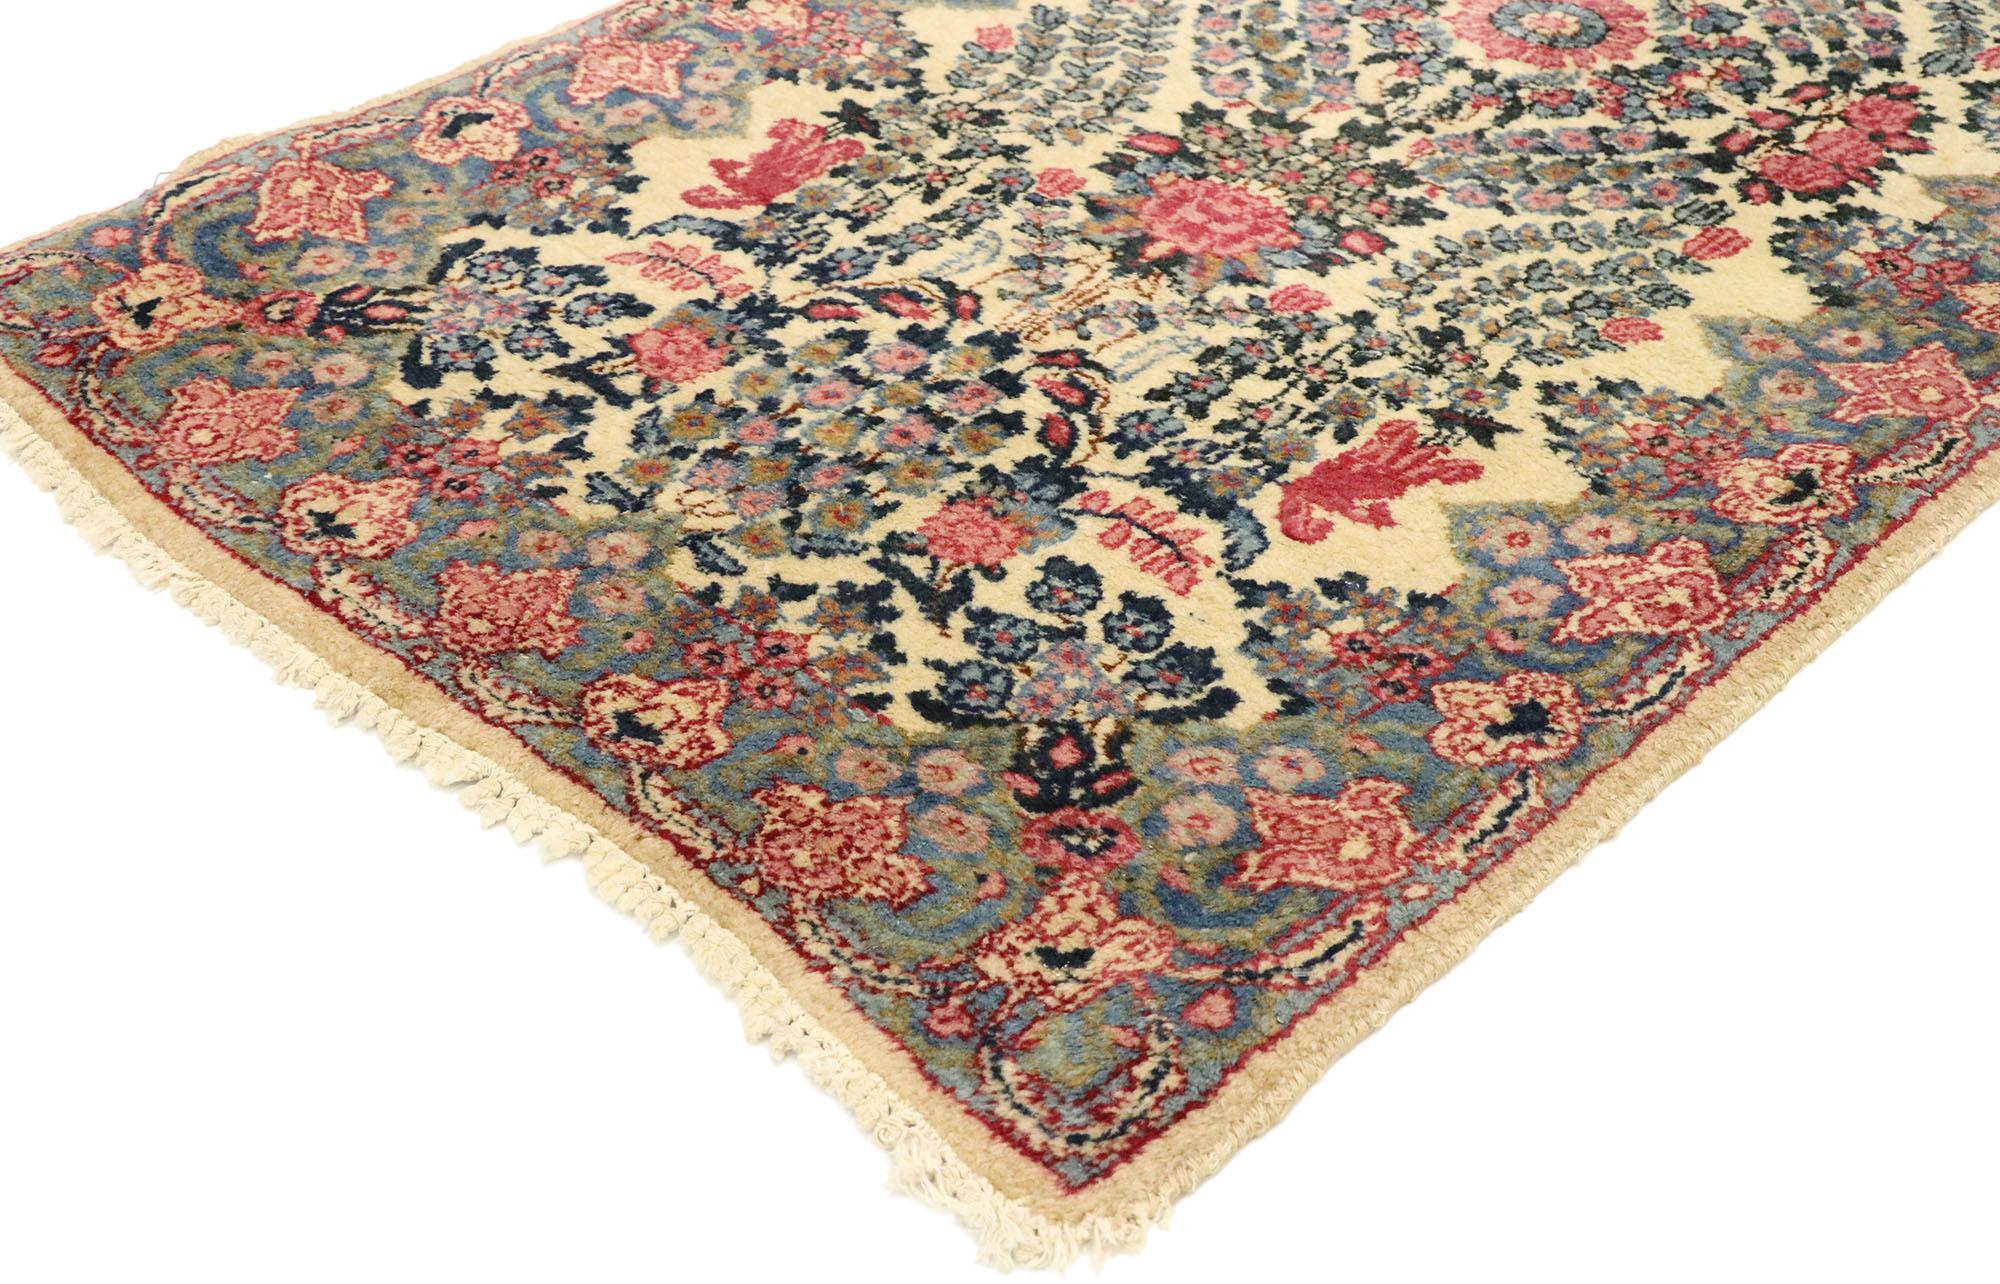 72549 Antique Persian Kerman Scatter Rug with Traditional French Rococo Style 02'01 x 04'00. Sophisticated and refined with a traditional style, this hand knotted wool vintage Persian Kerman rug charms with ease. The abrashed beige field features